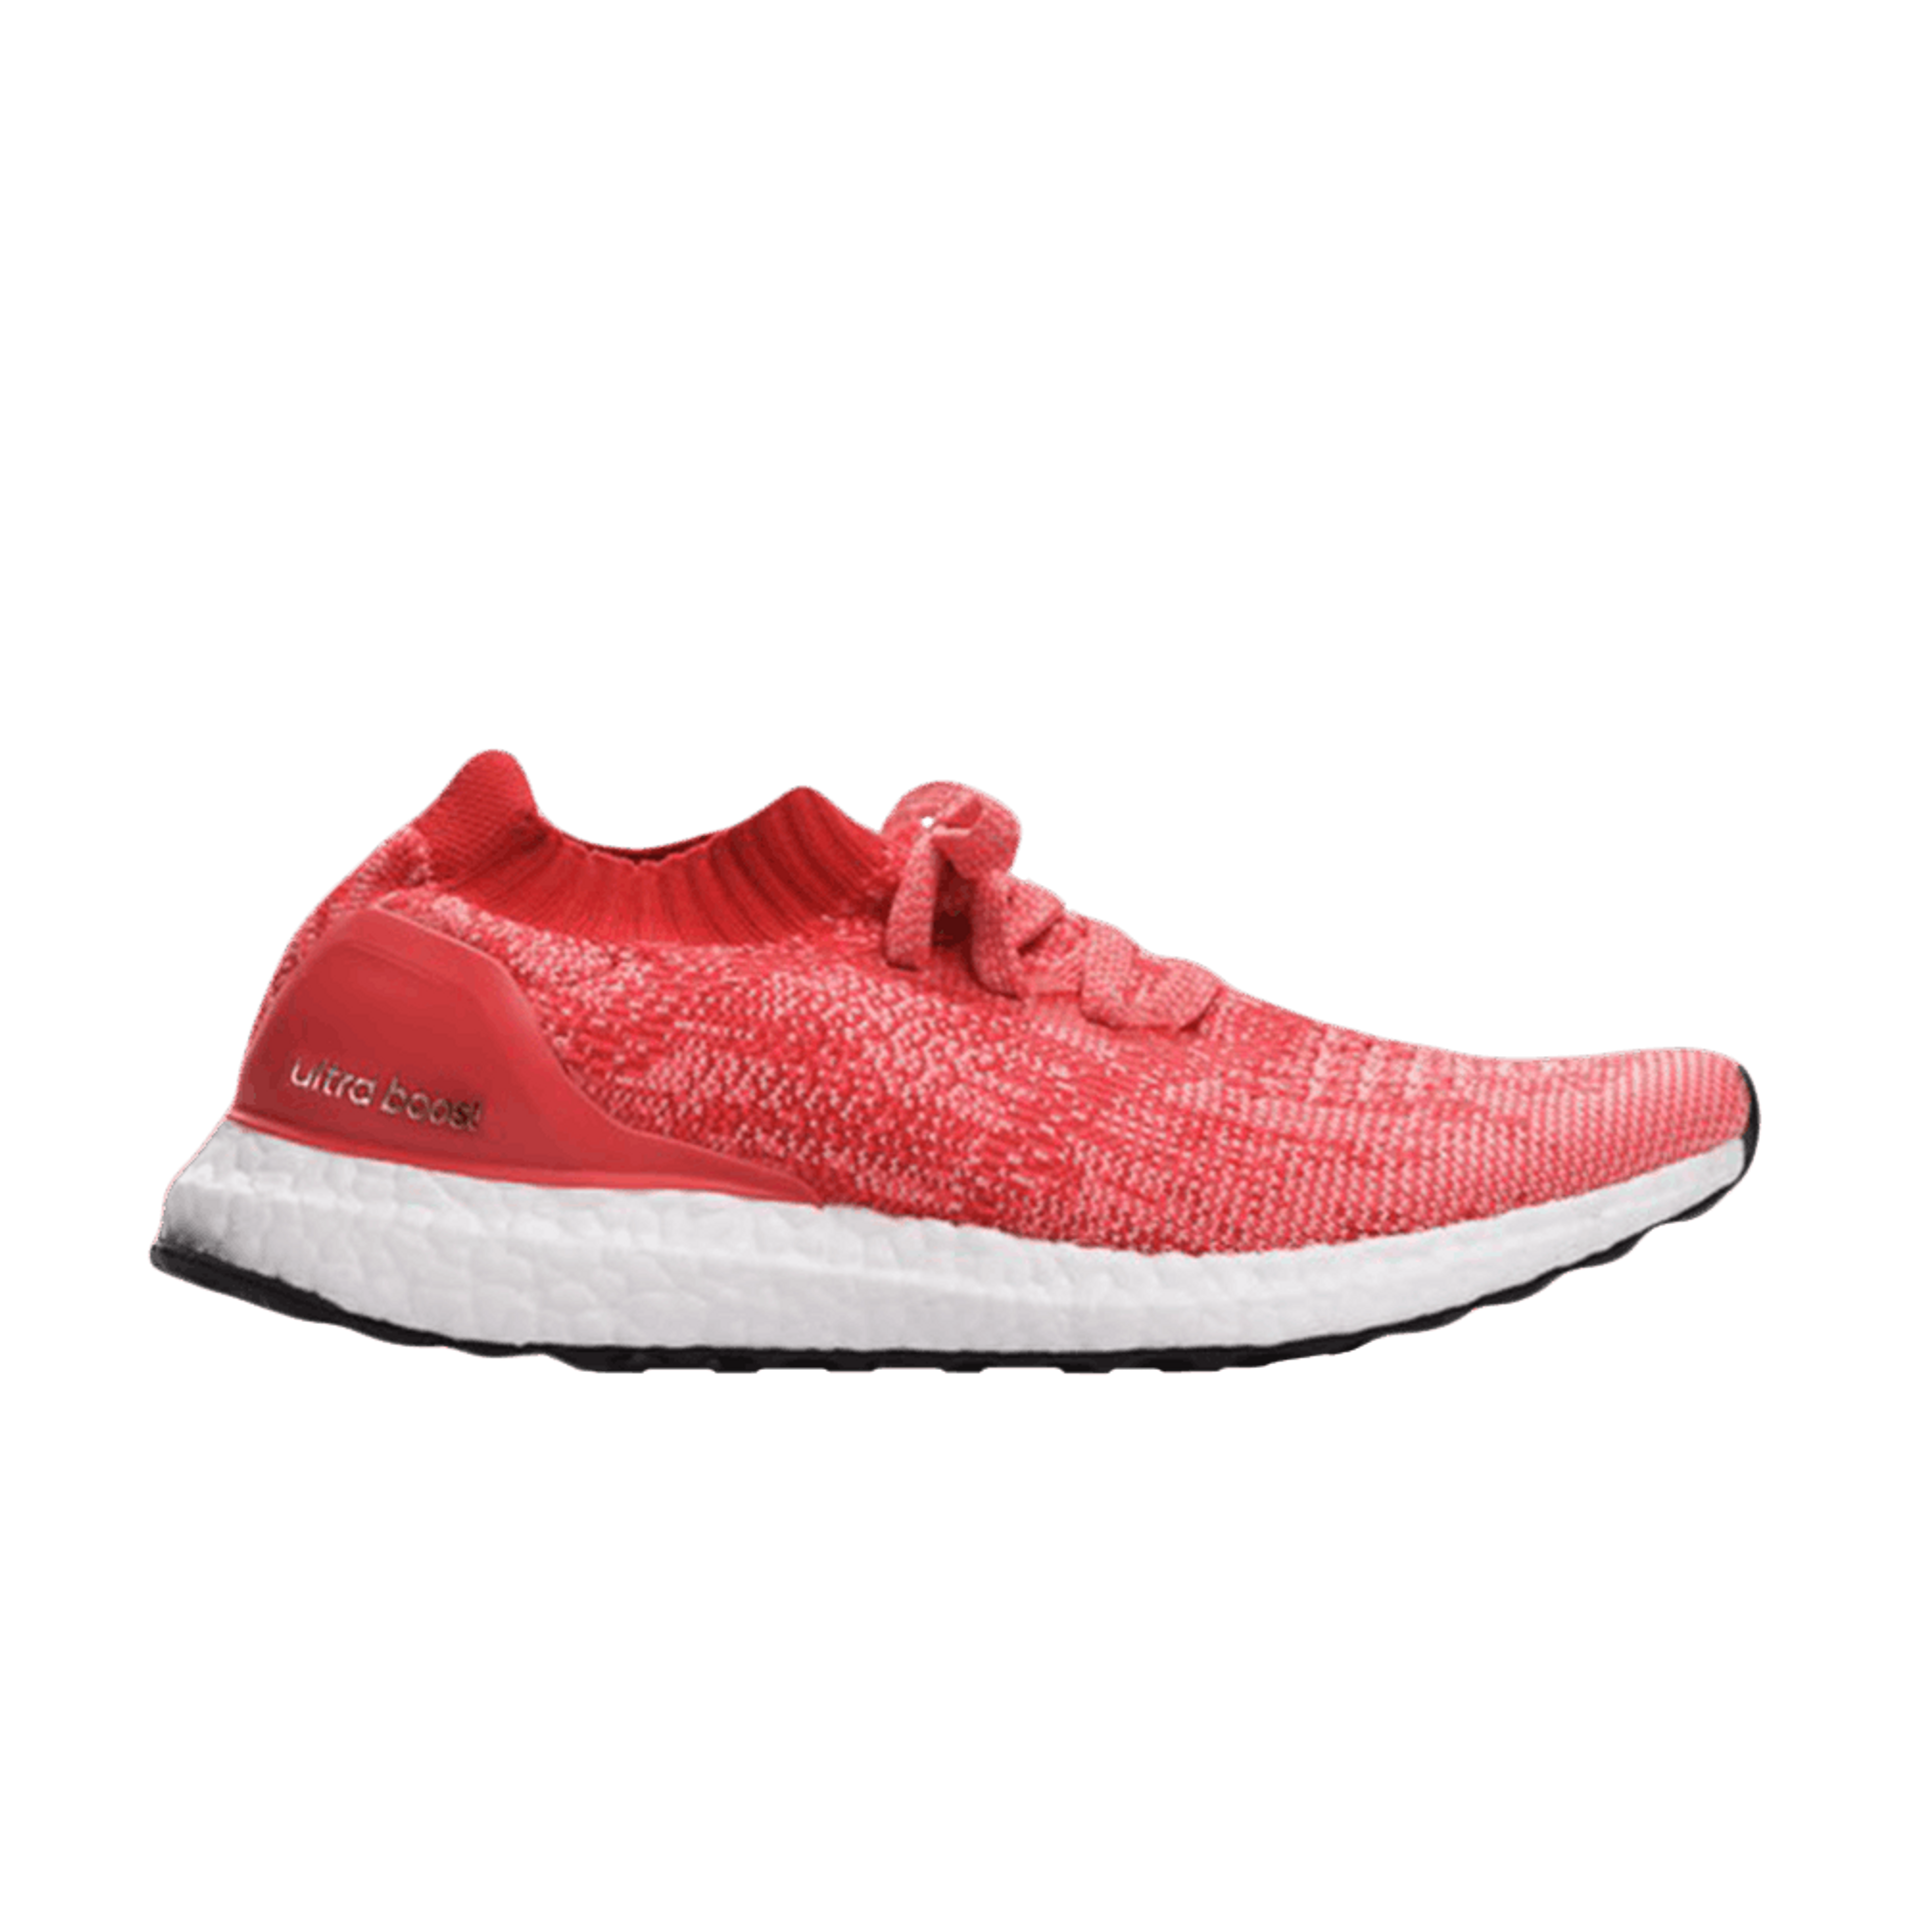 Wmns UltraBoost Uncaged 'Shock Red'